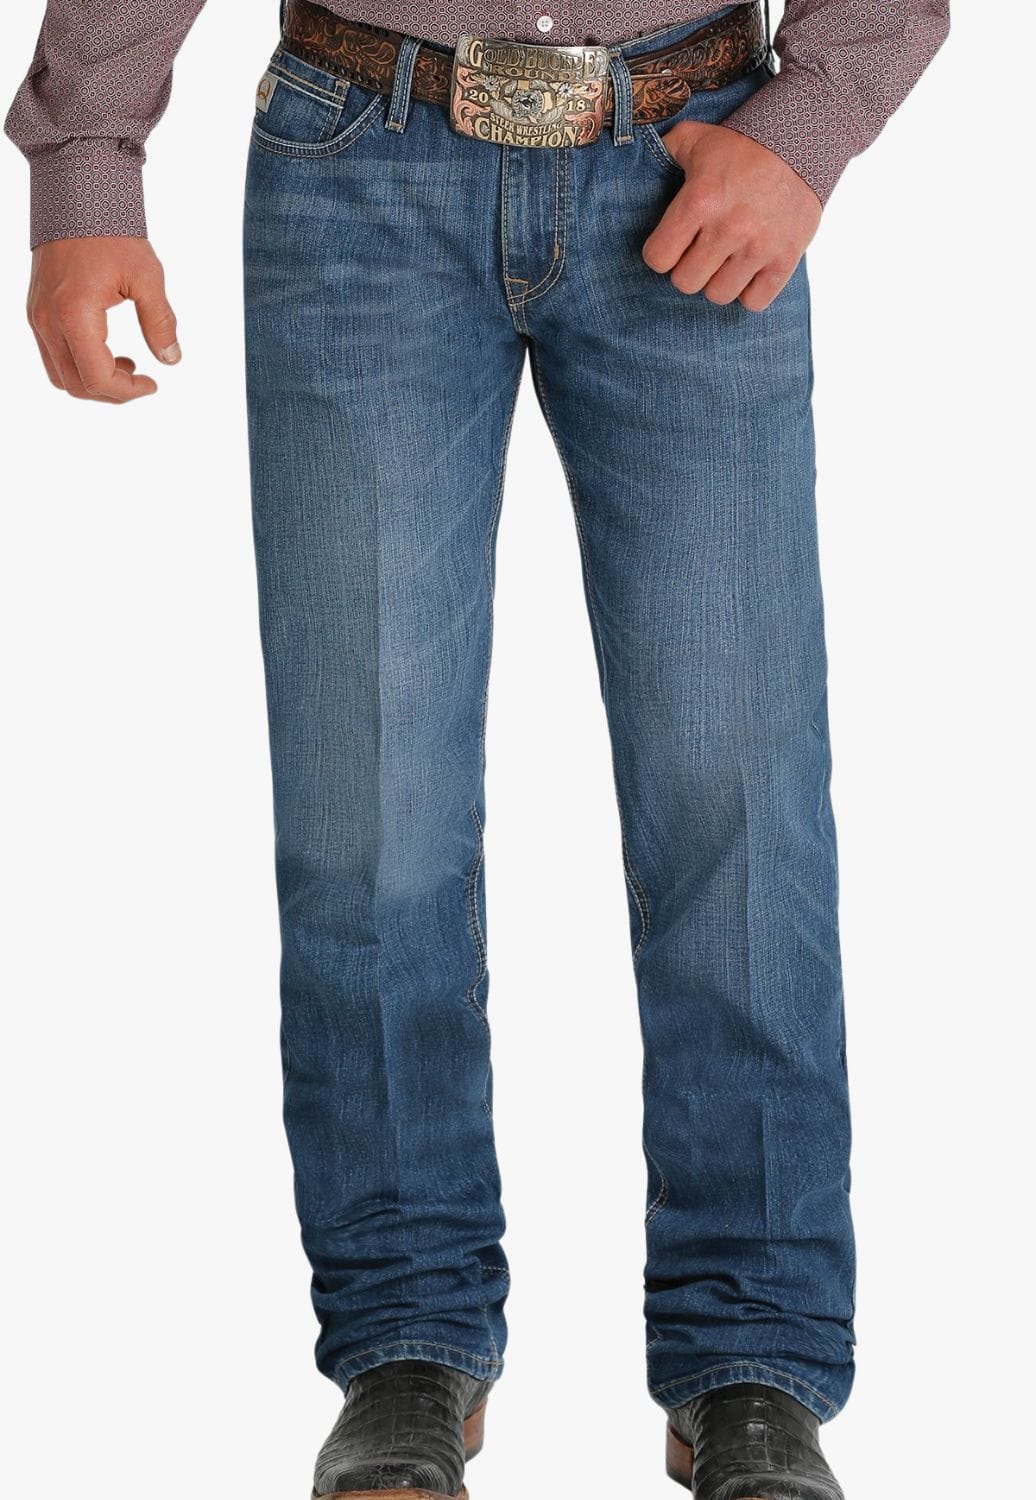 Cinch CLOTHING-Mens Jeans Cinch Mens Jesse Straight Fit Jean